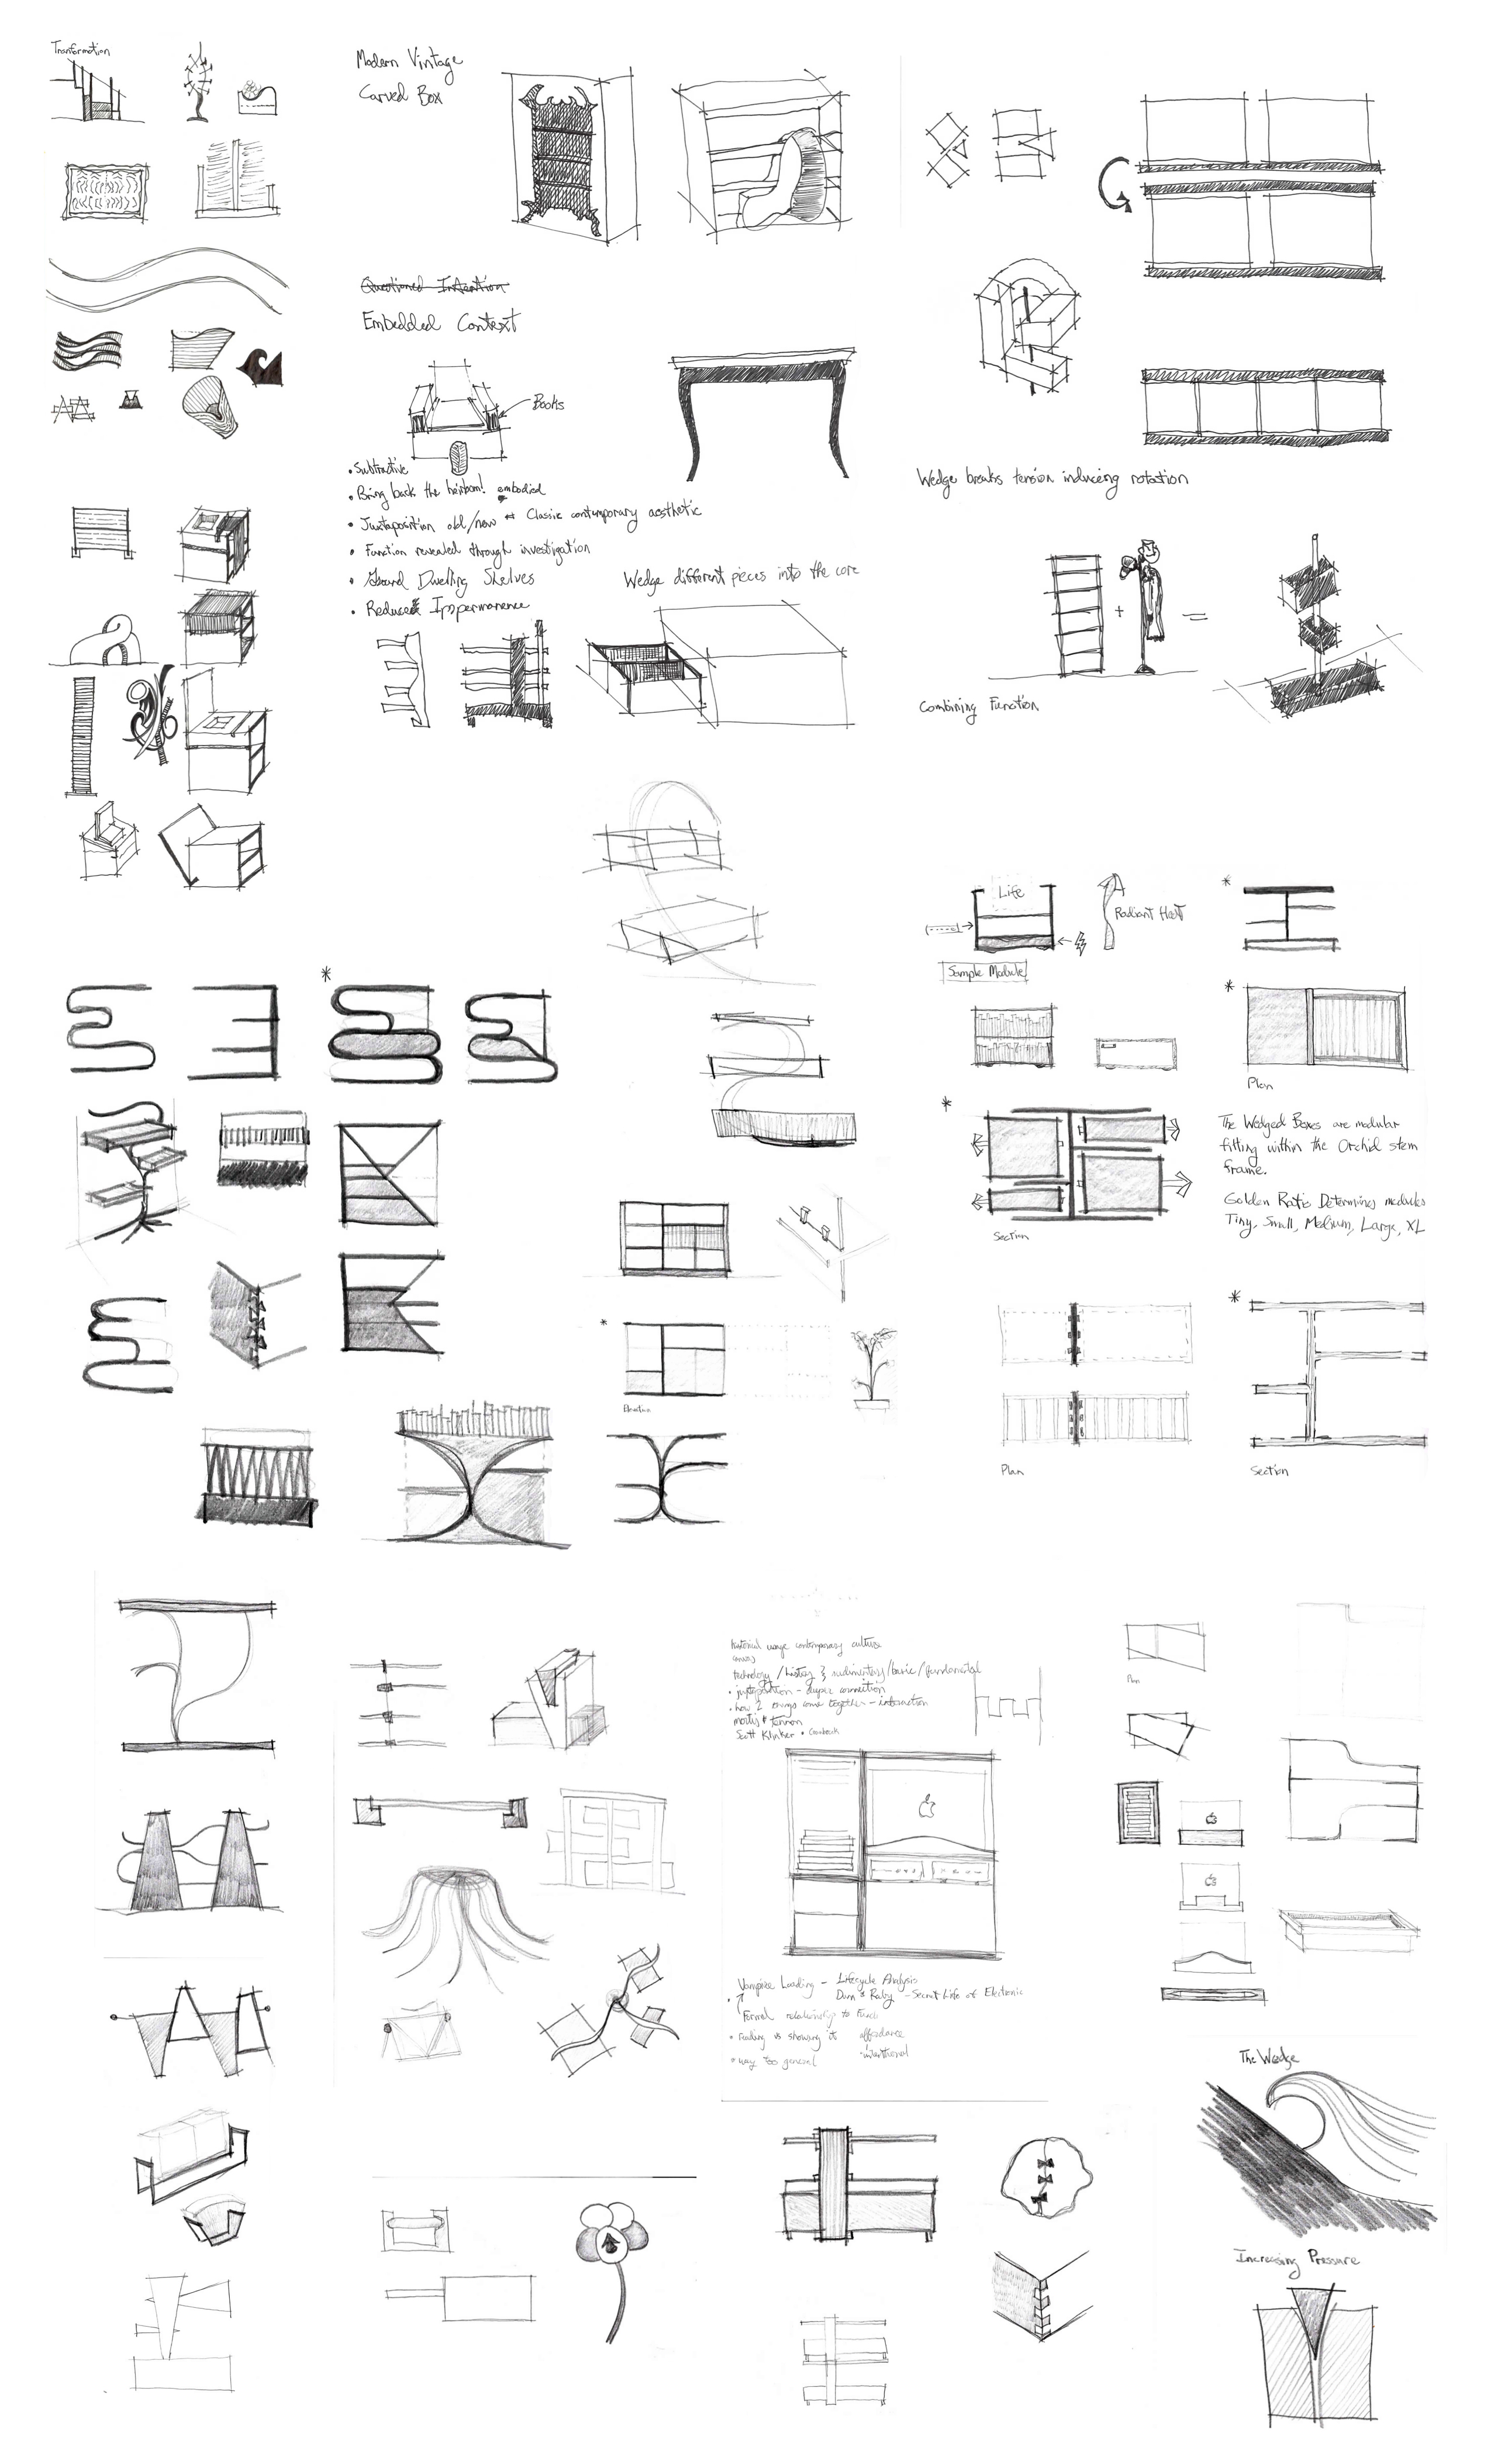 Wedged Walnut, Design Furniture Process: Early Sketch Brainstorming